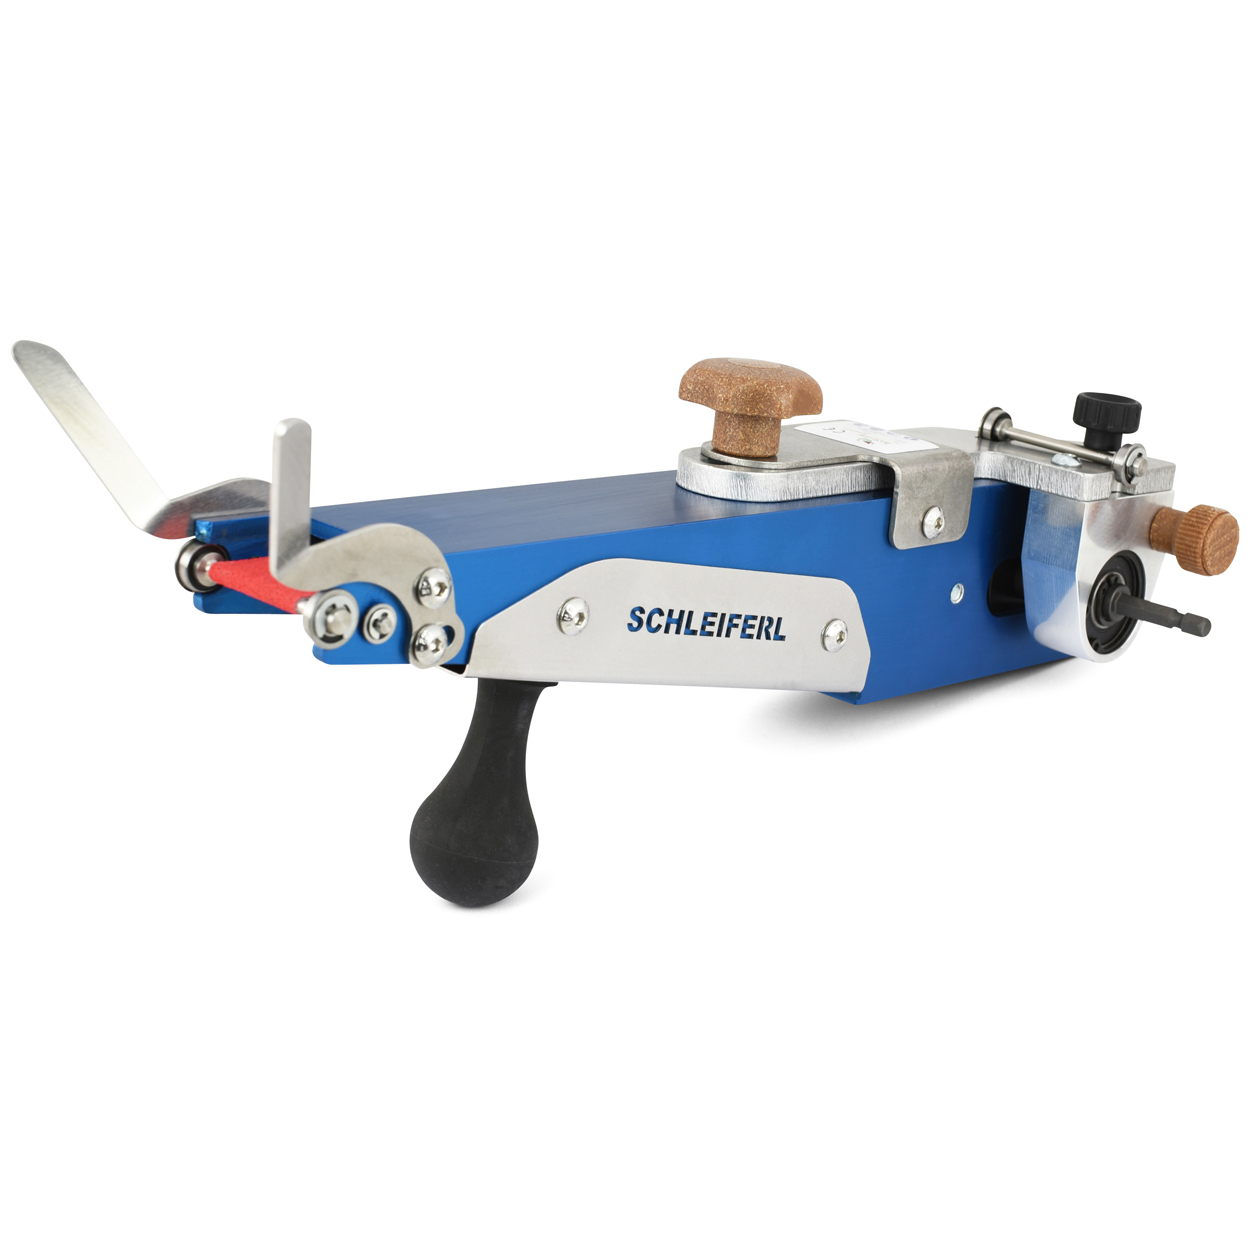 Schleiferl – The sharpening tool for saw chains (OUT OF STOCK)